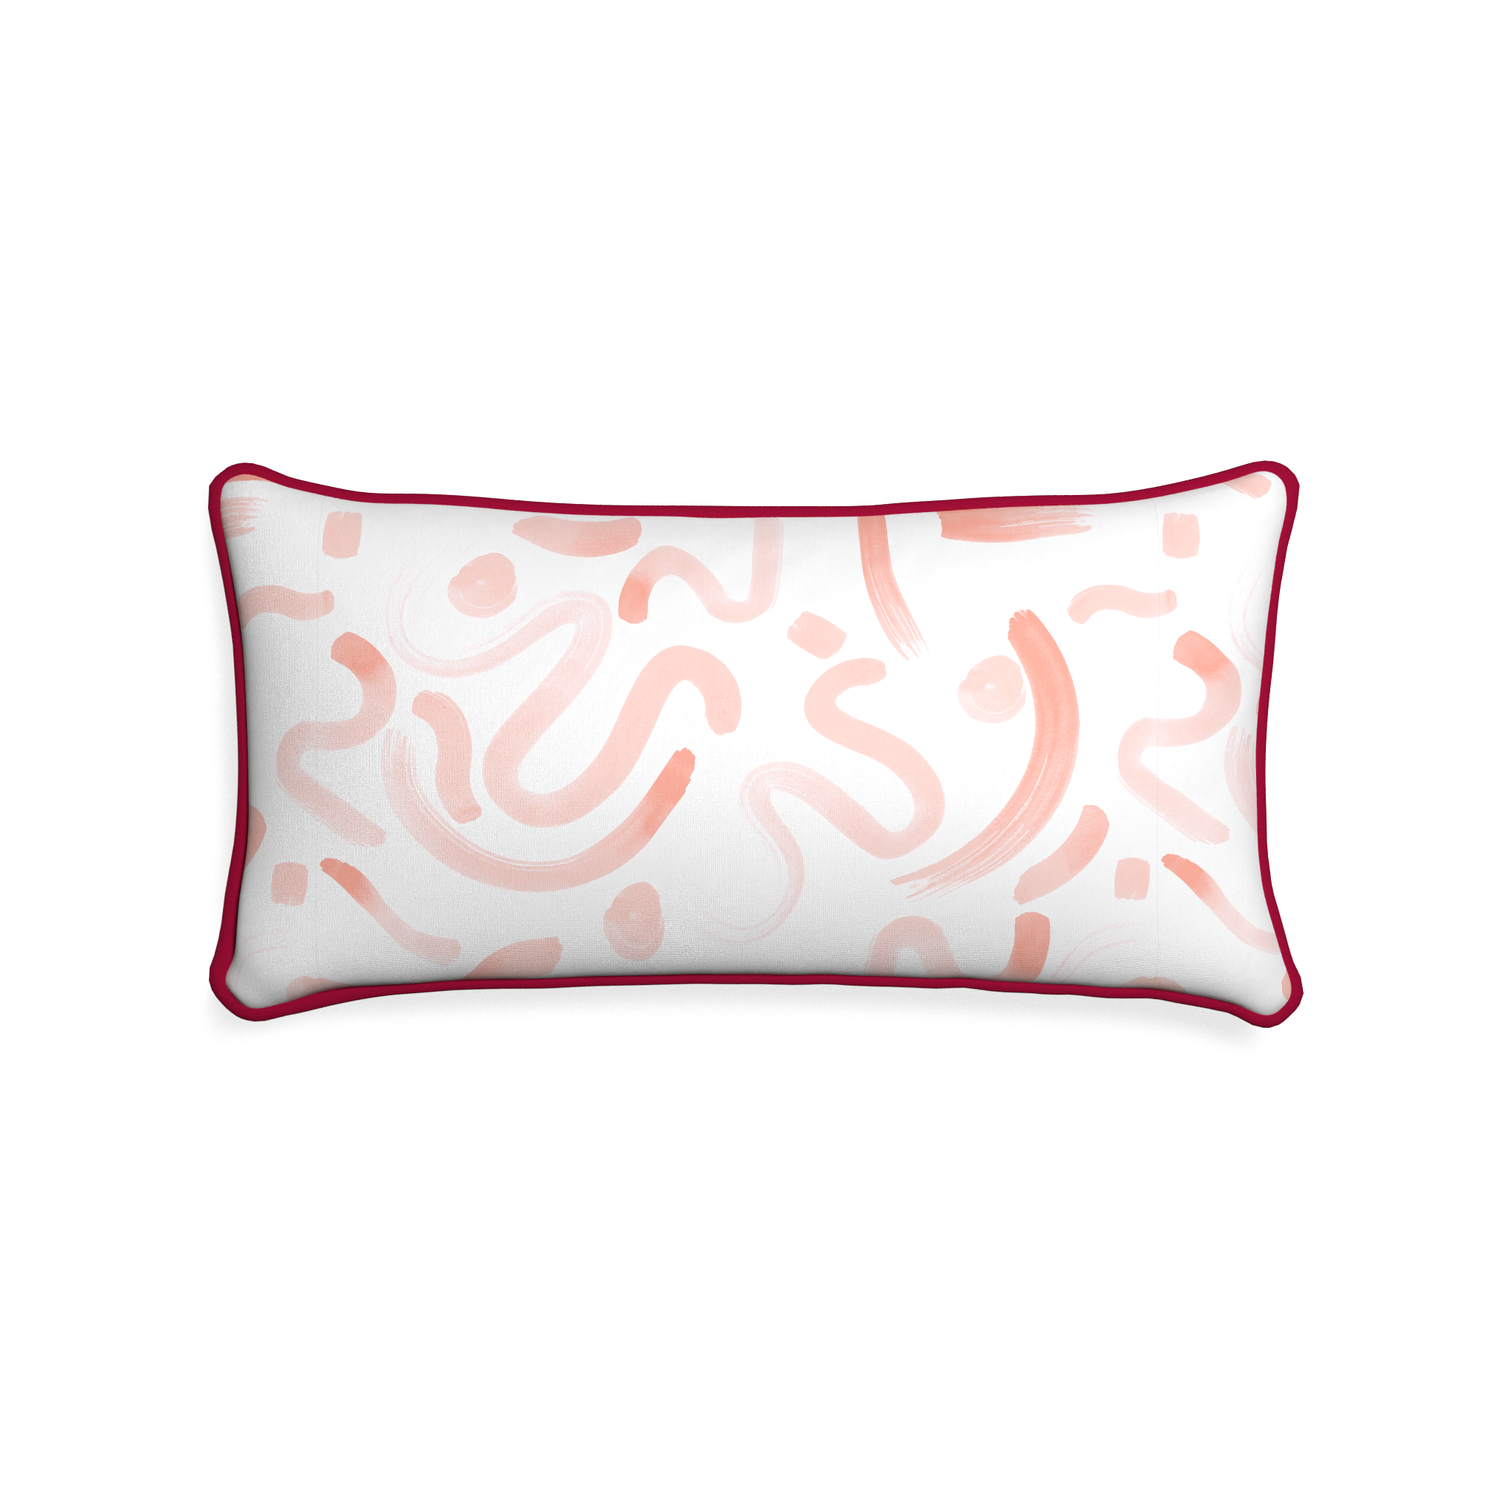 Midi-lumbar hockney pink custom pink graphicpillow with raspberry piping on white background